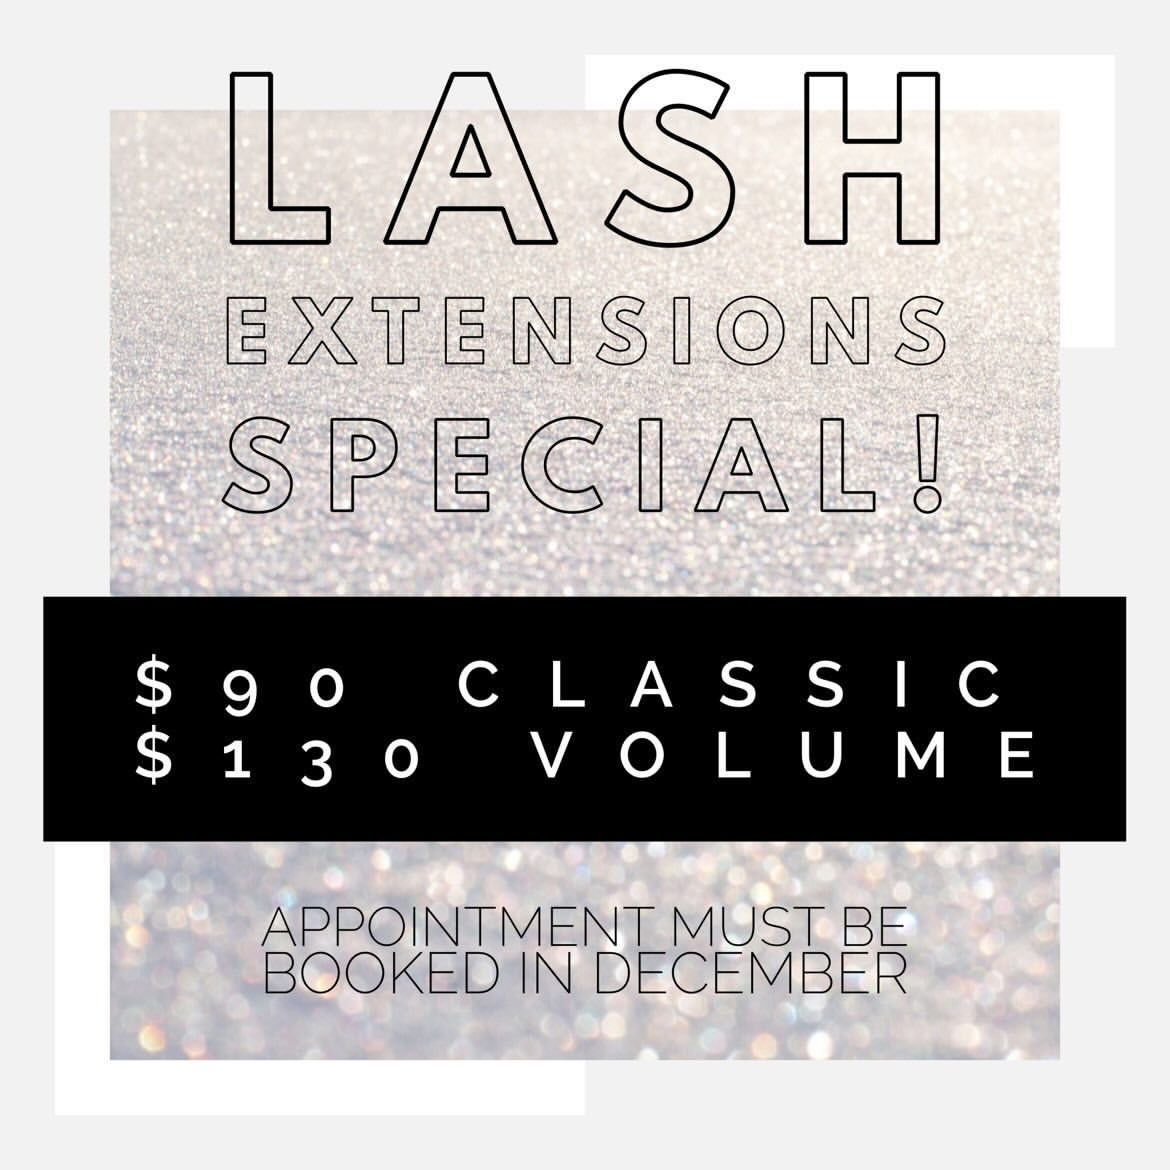 Lash Extensions Special. S90 Classic. S130 Volume. Appointment must be booked in December. 